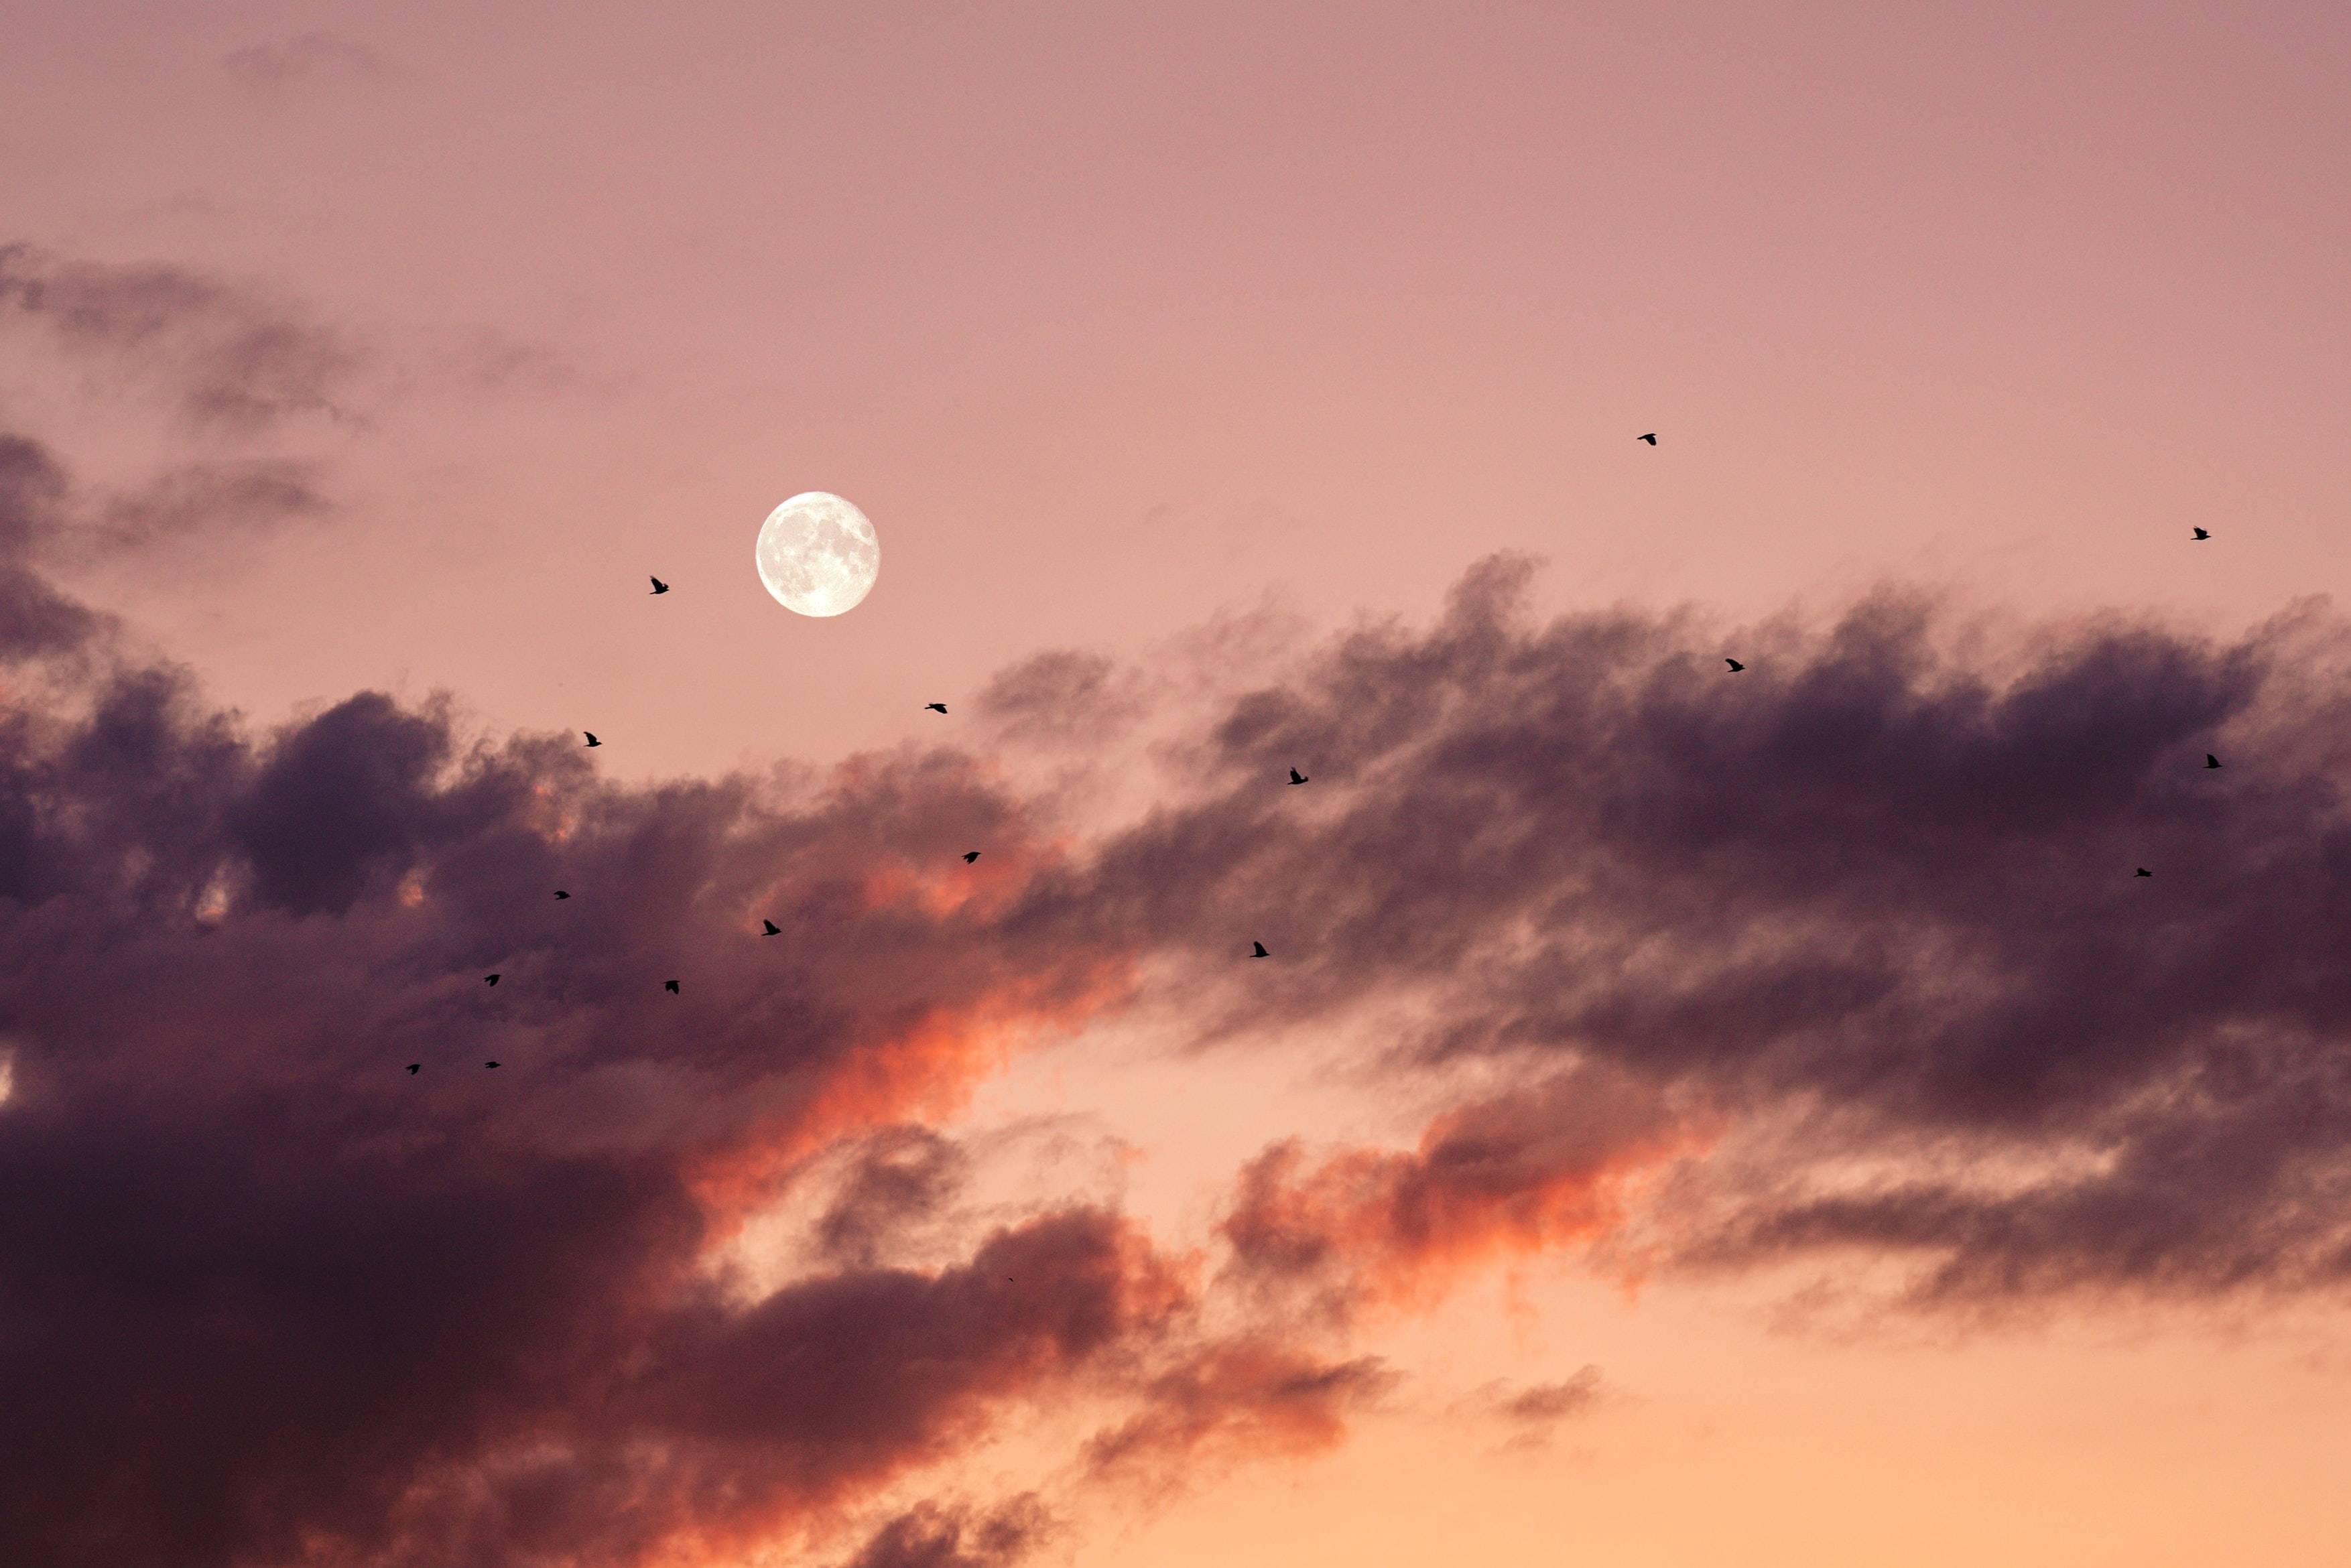 A bird flying in the sky at sunset - Moon